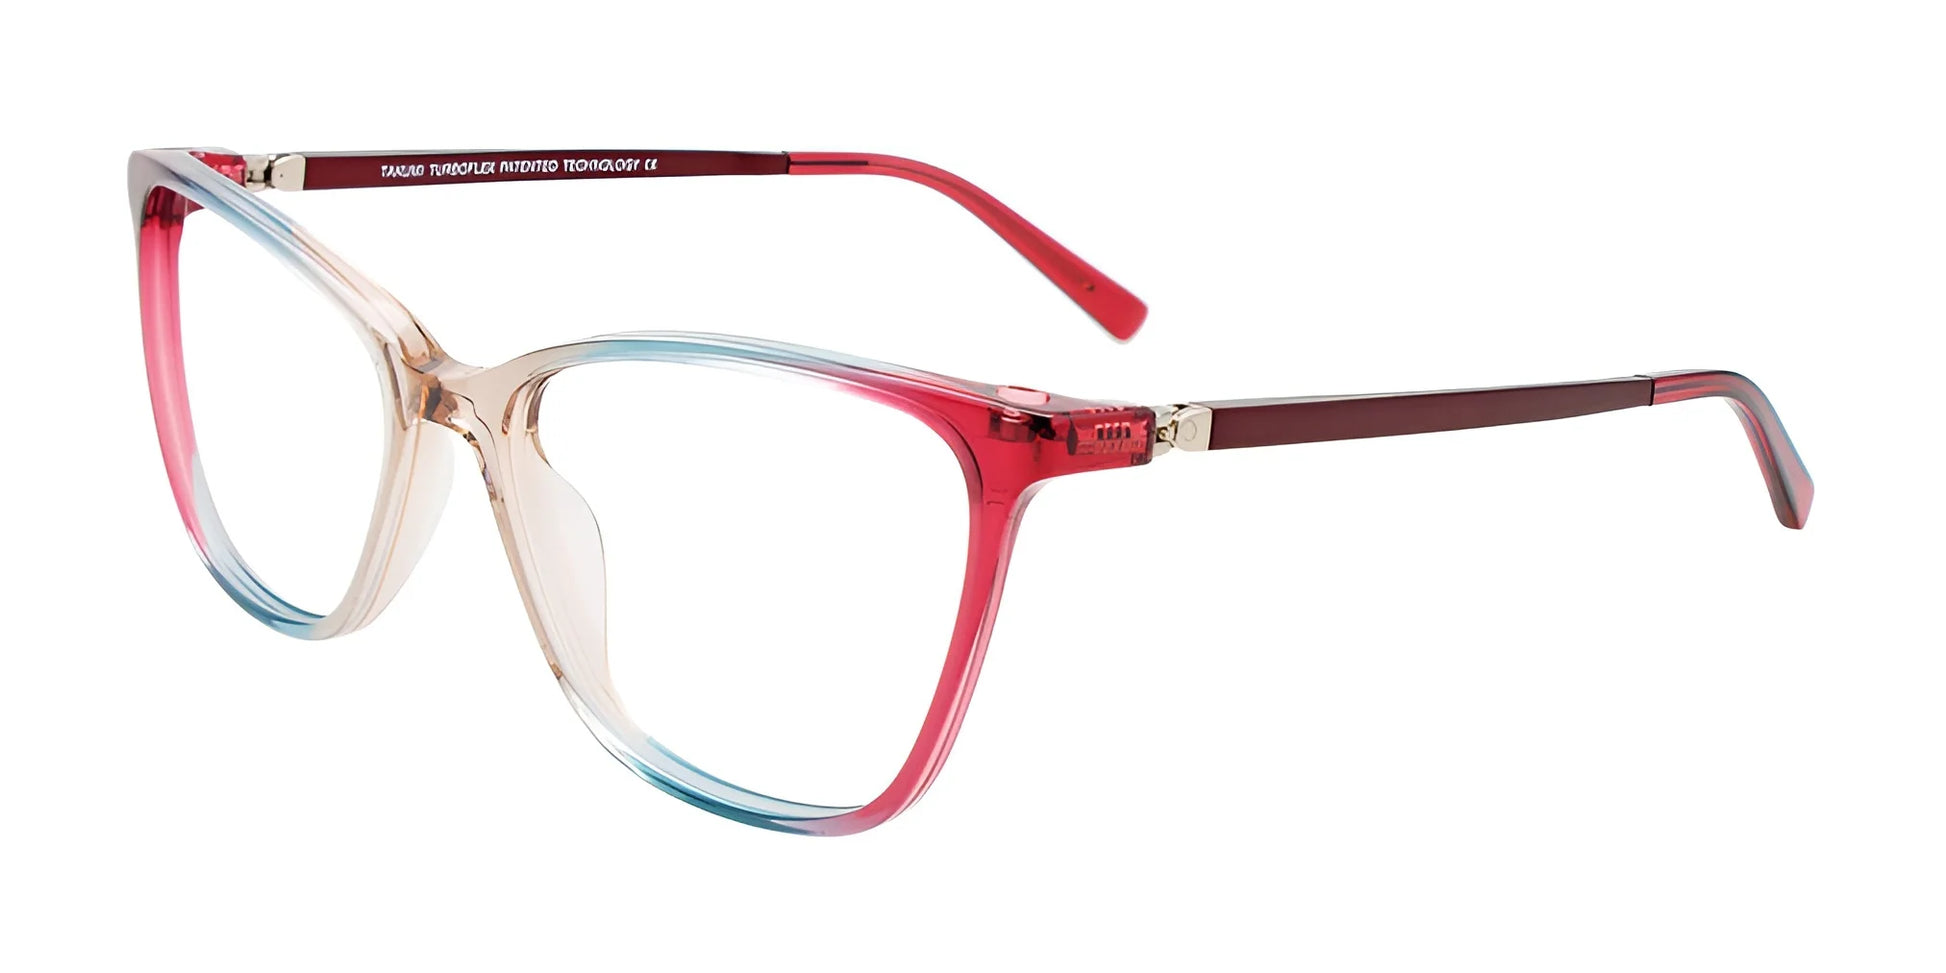 Takumi TK1197 Eyeglasses with Clip-on Sunglasses Gradient Beige & Teal & Strawberry / Red